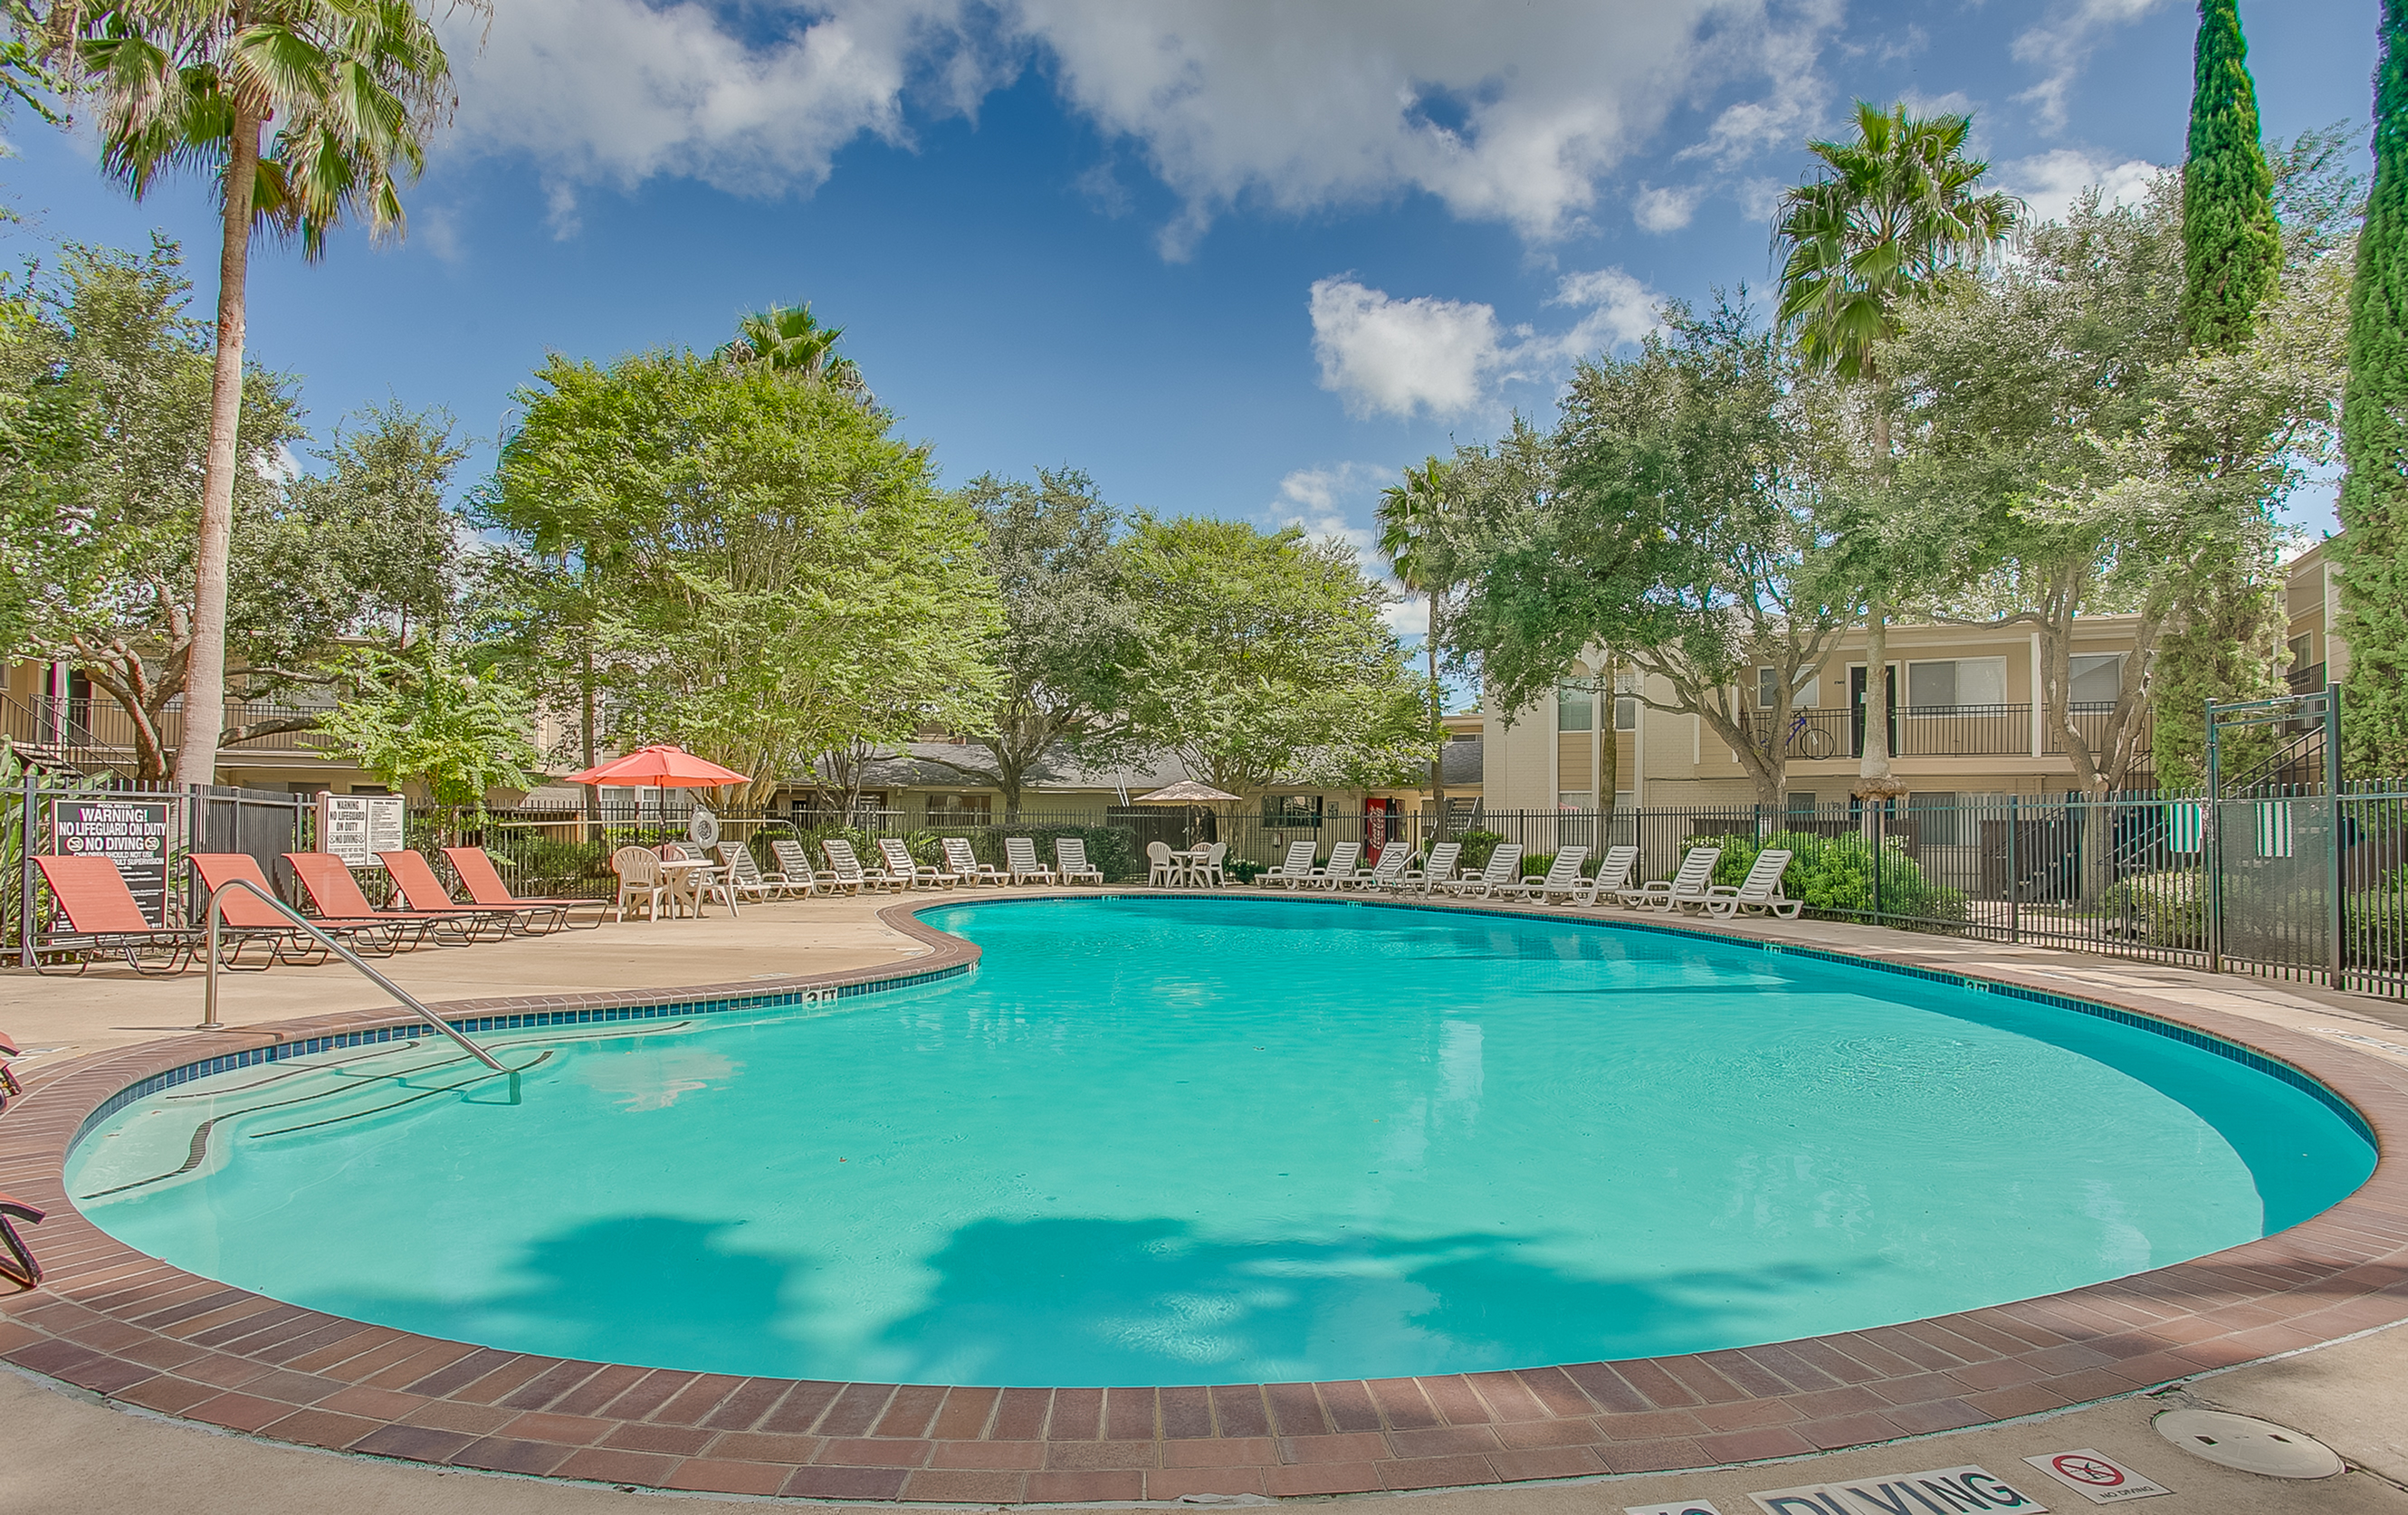 View of Pool Area, Showing Fenced-In Area, Picnic Area, and Loungers at The Regatta Apartments